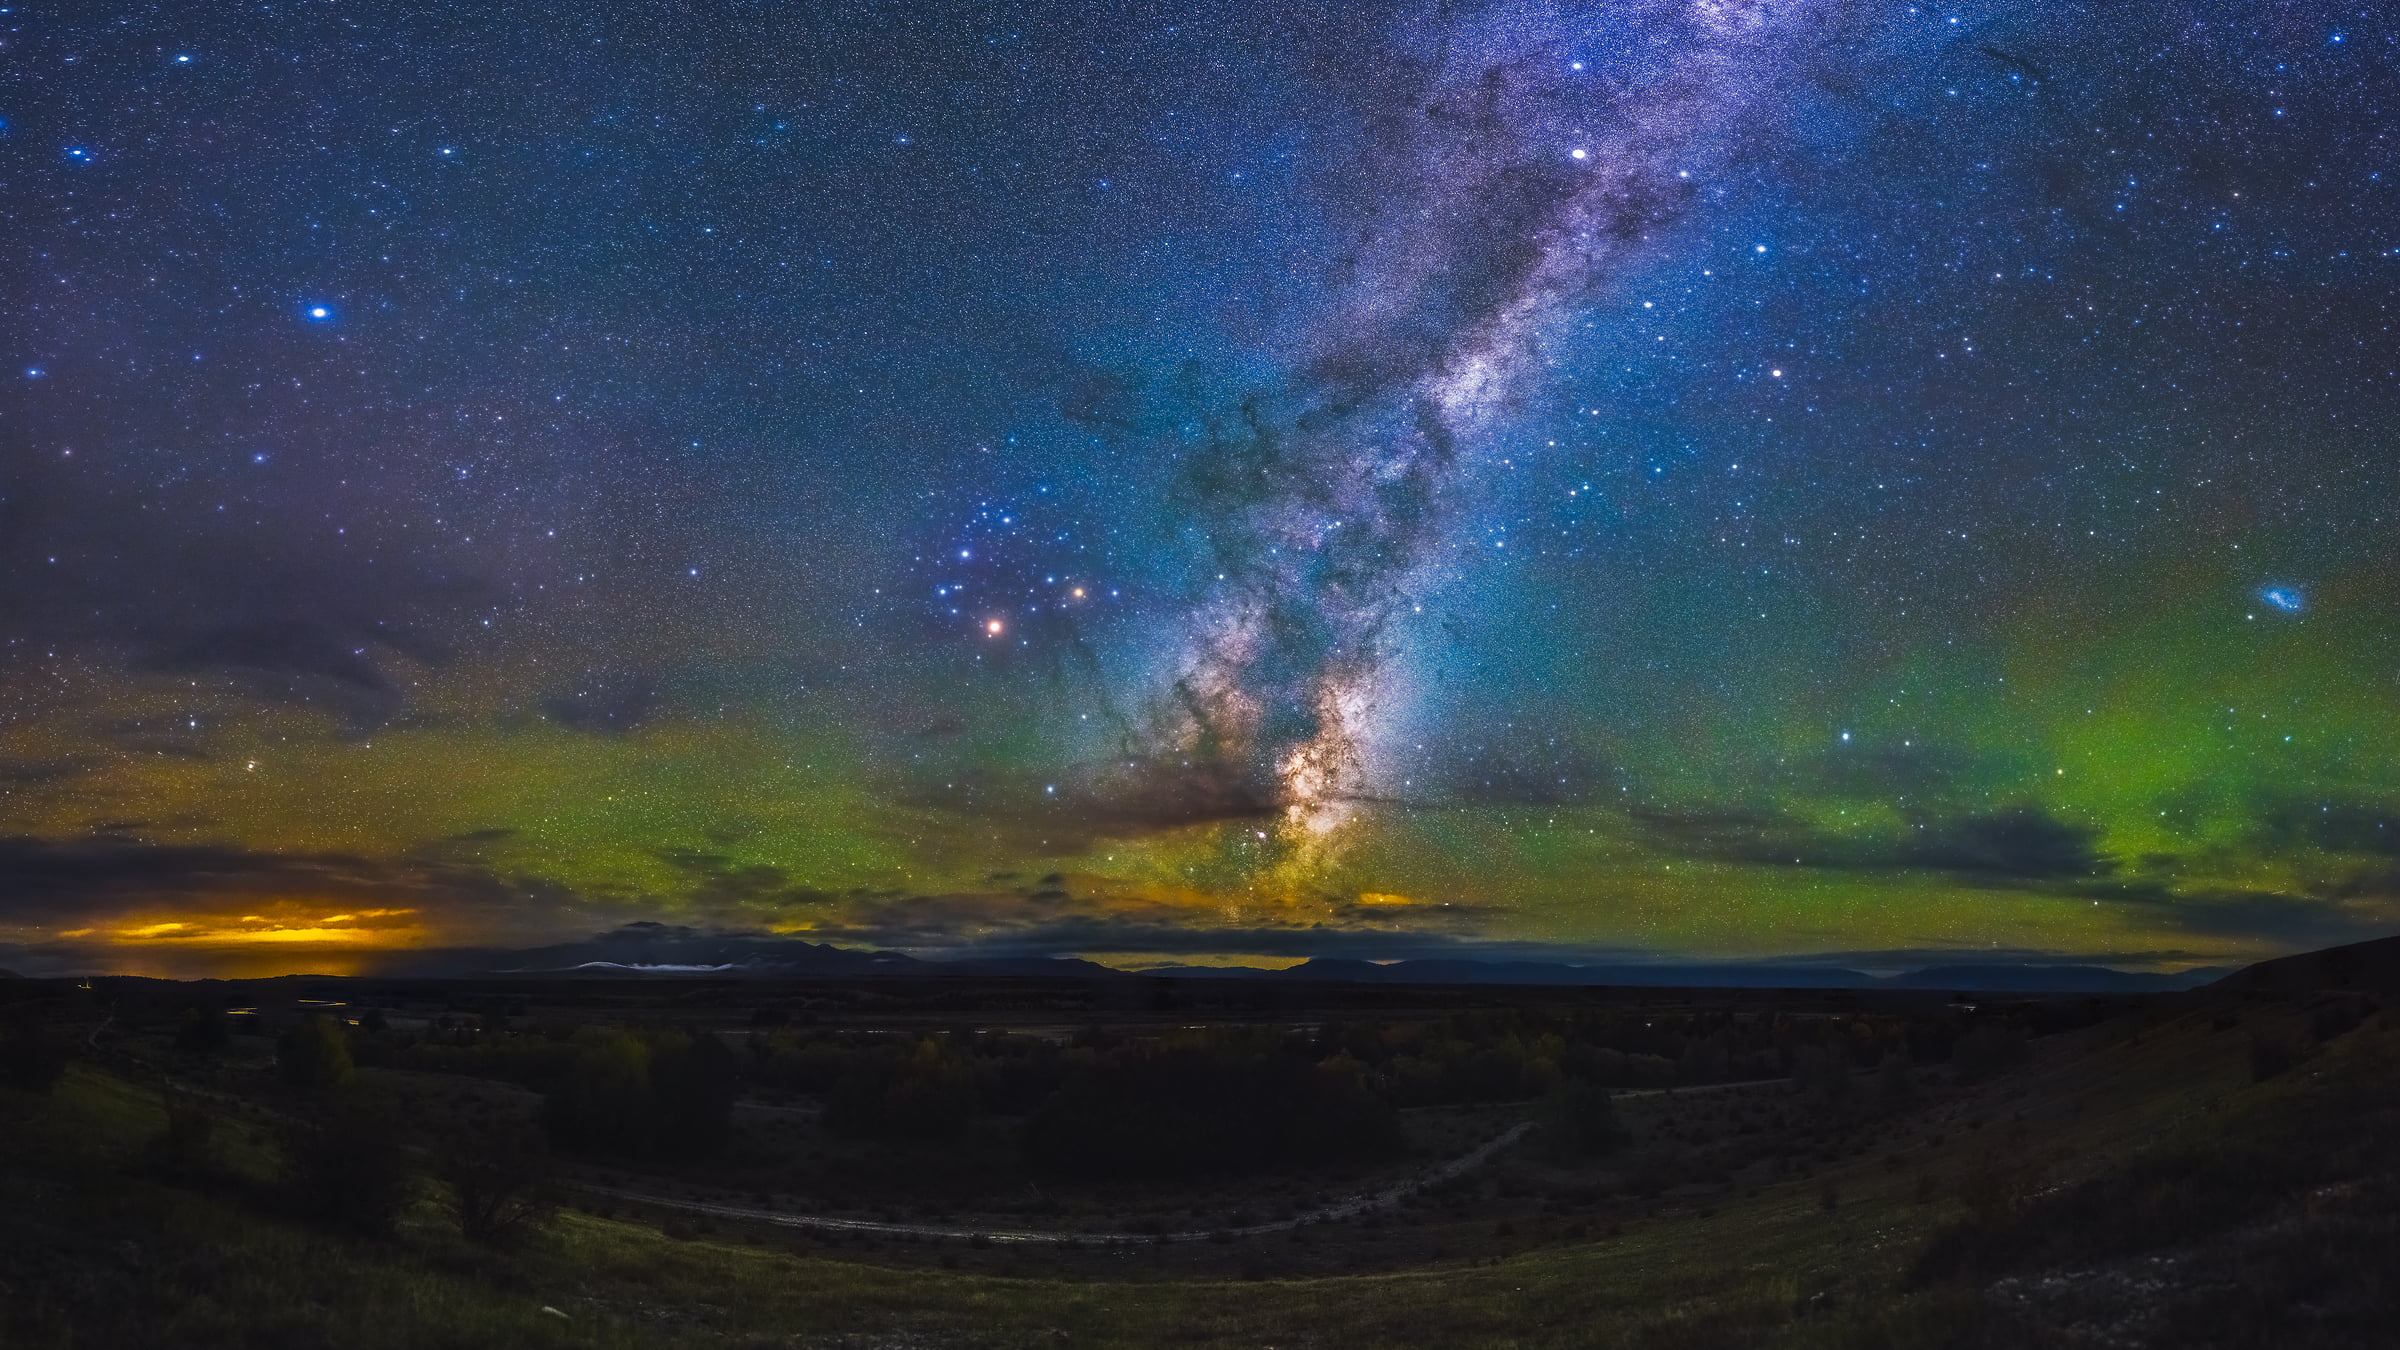 306 megapixels! A very high resolution, large-format VAST photo print of the night sky, milky way, and stars; fine art astrophotography landscape photo created by Paul Wilson in New Zealand.